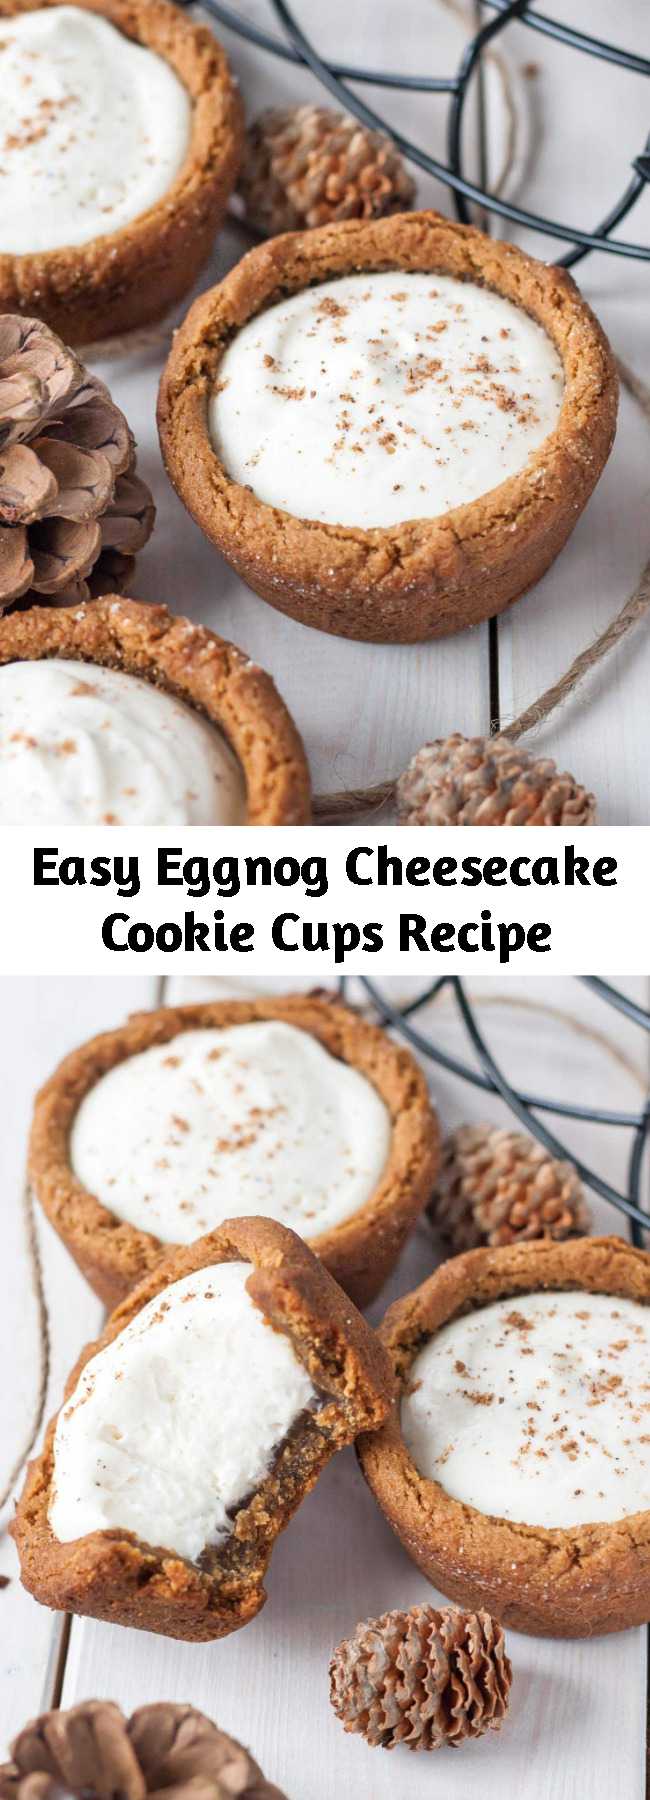 Easy Eggnog Cheesecake Cookie Cups Recipe - The best treat for the holidays! Chewy gingerbread cookie cups filled with a fluffy eggnog cheesecake.